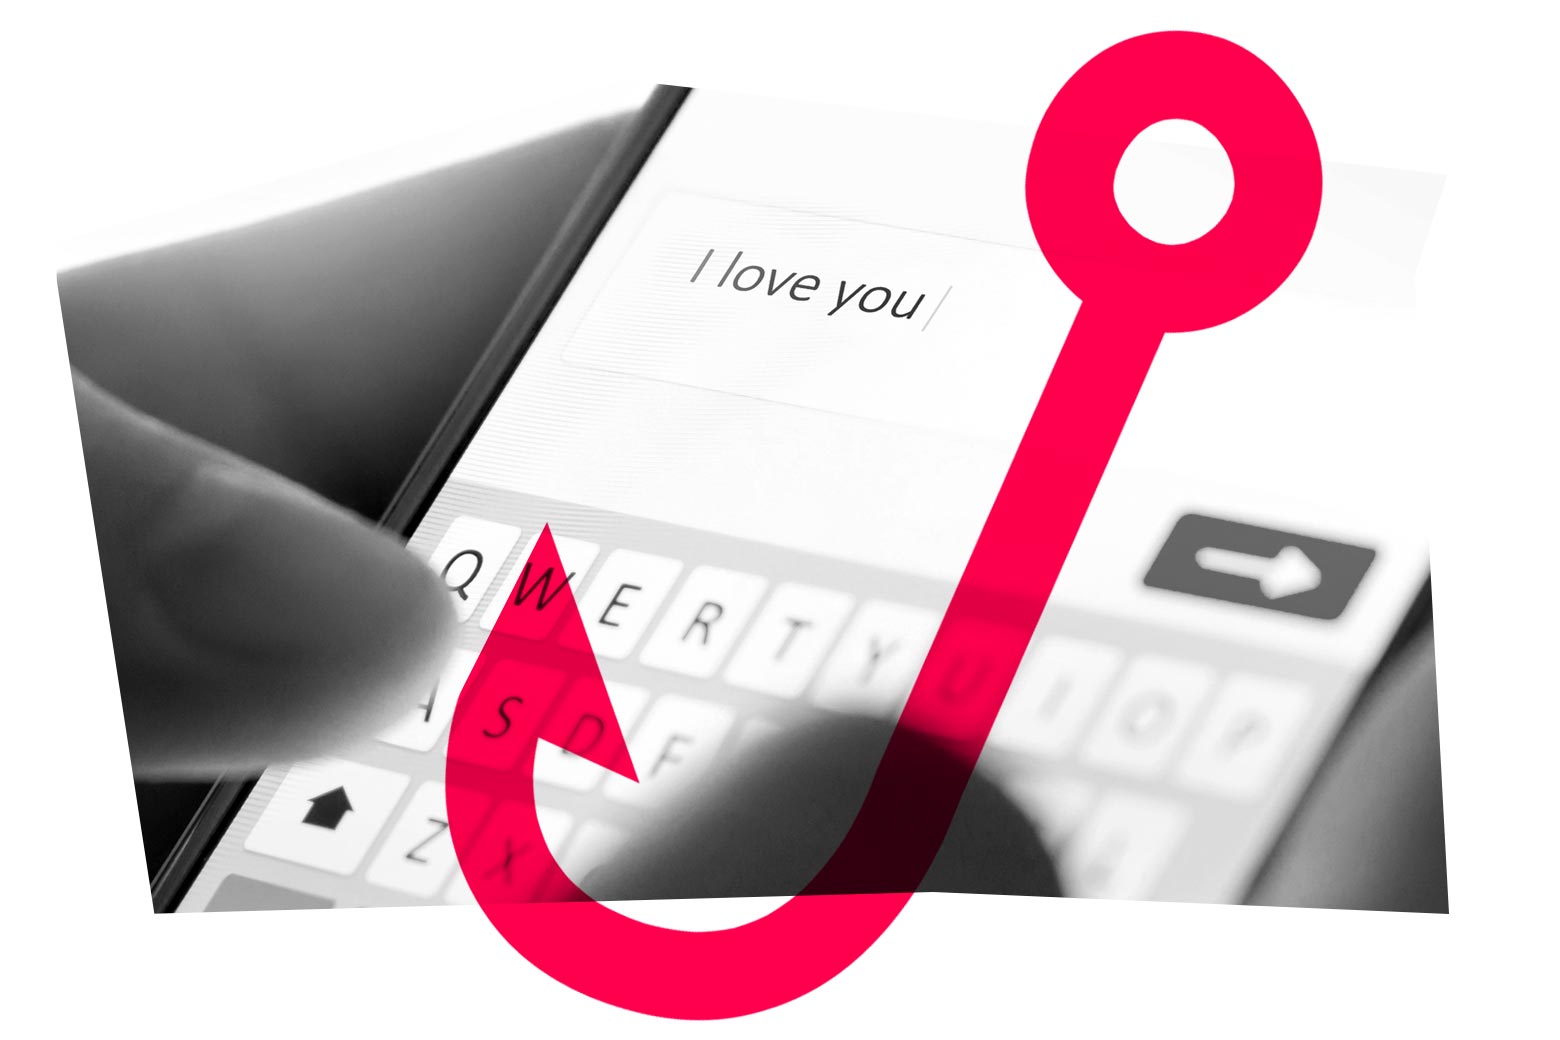 Photo of someone texting "I love you" on a smartphone, overlaid with a fish hook